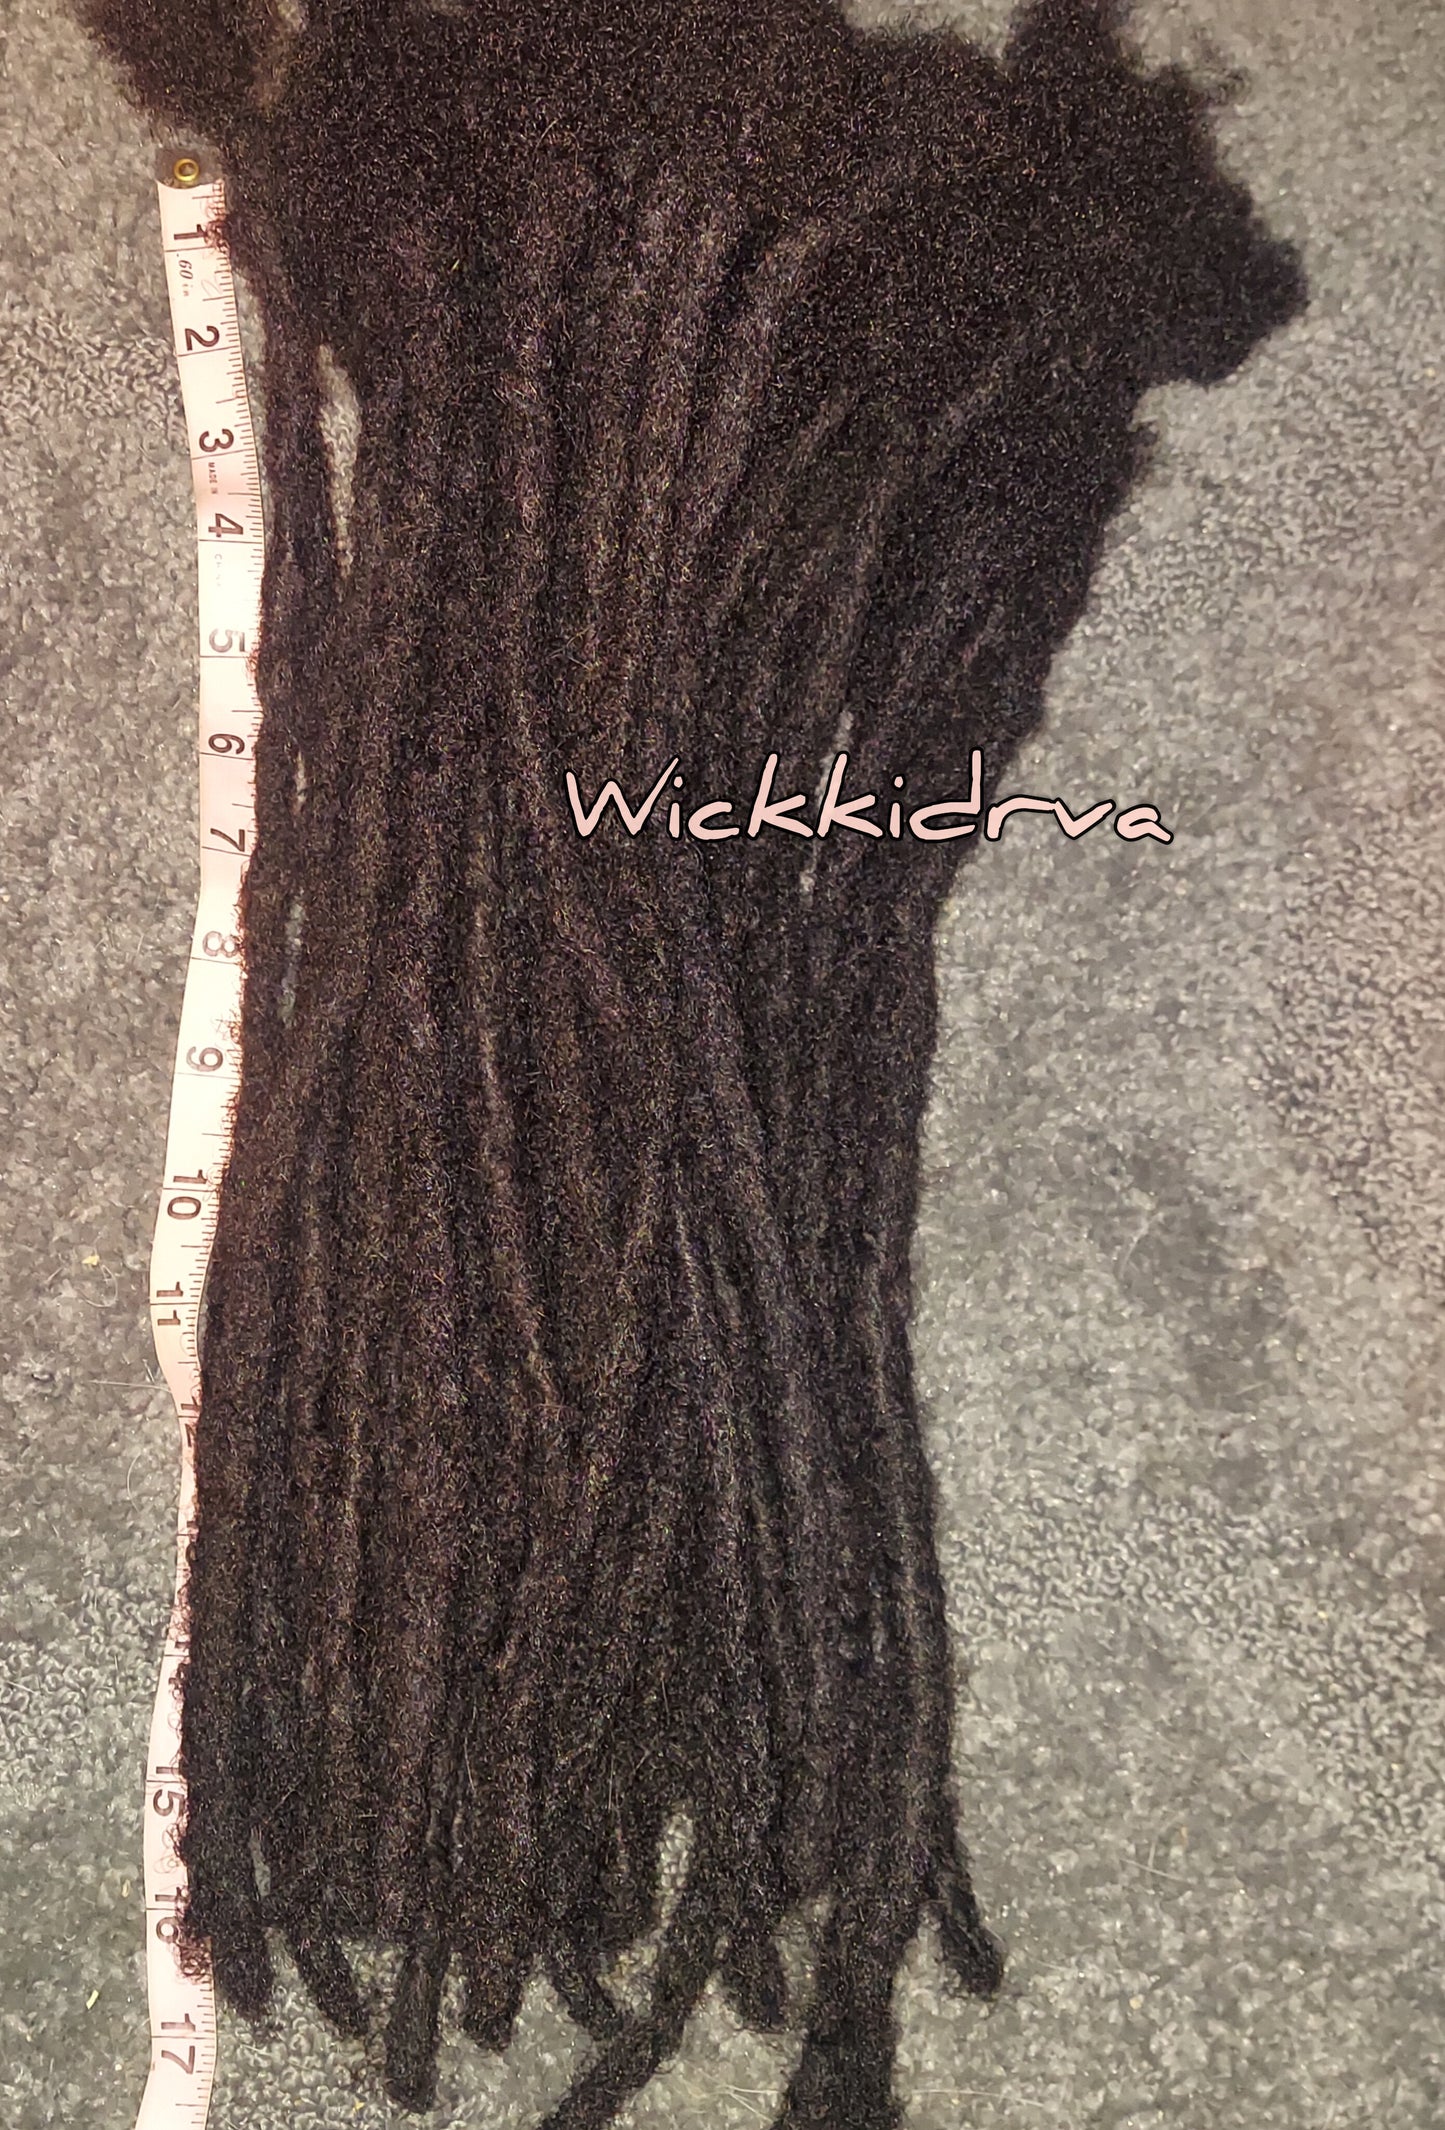 16in 0.75 loc-extensions by wickkidrva